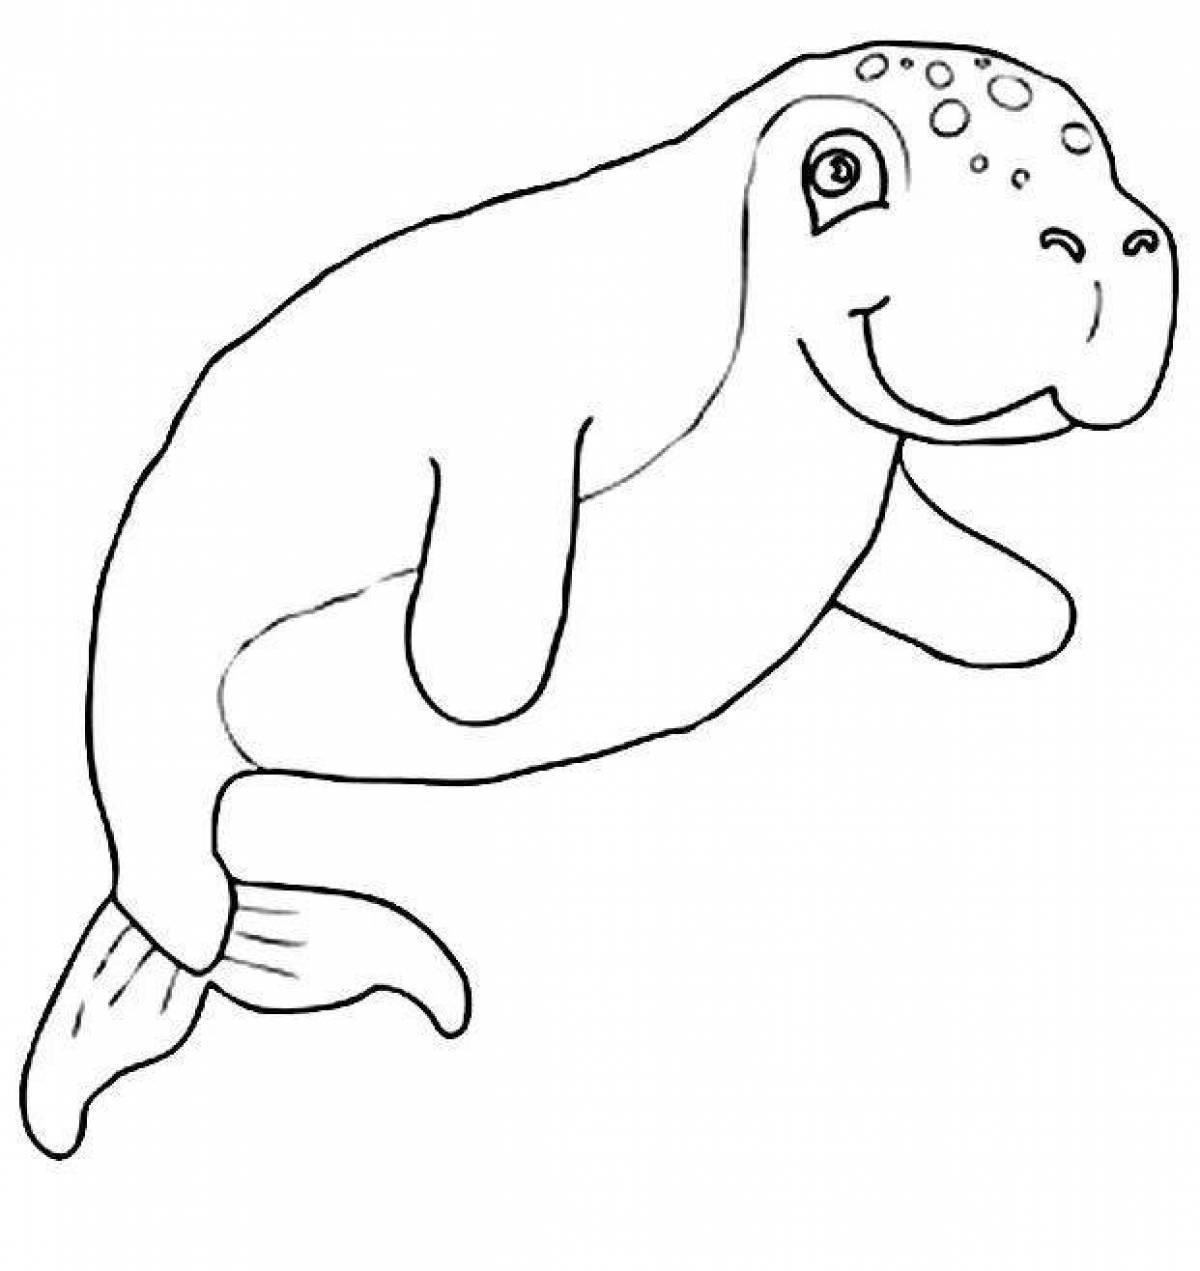 Coloring book shining elephant seal